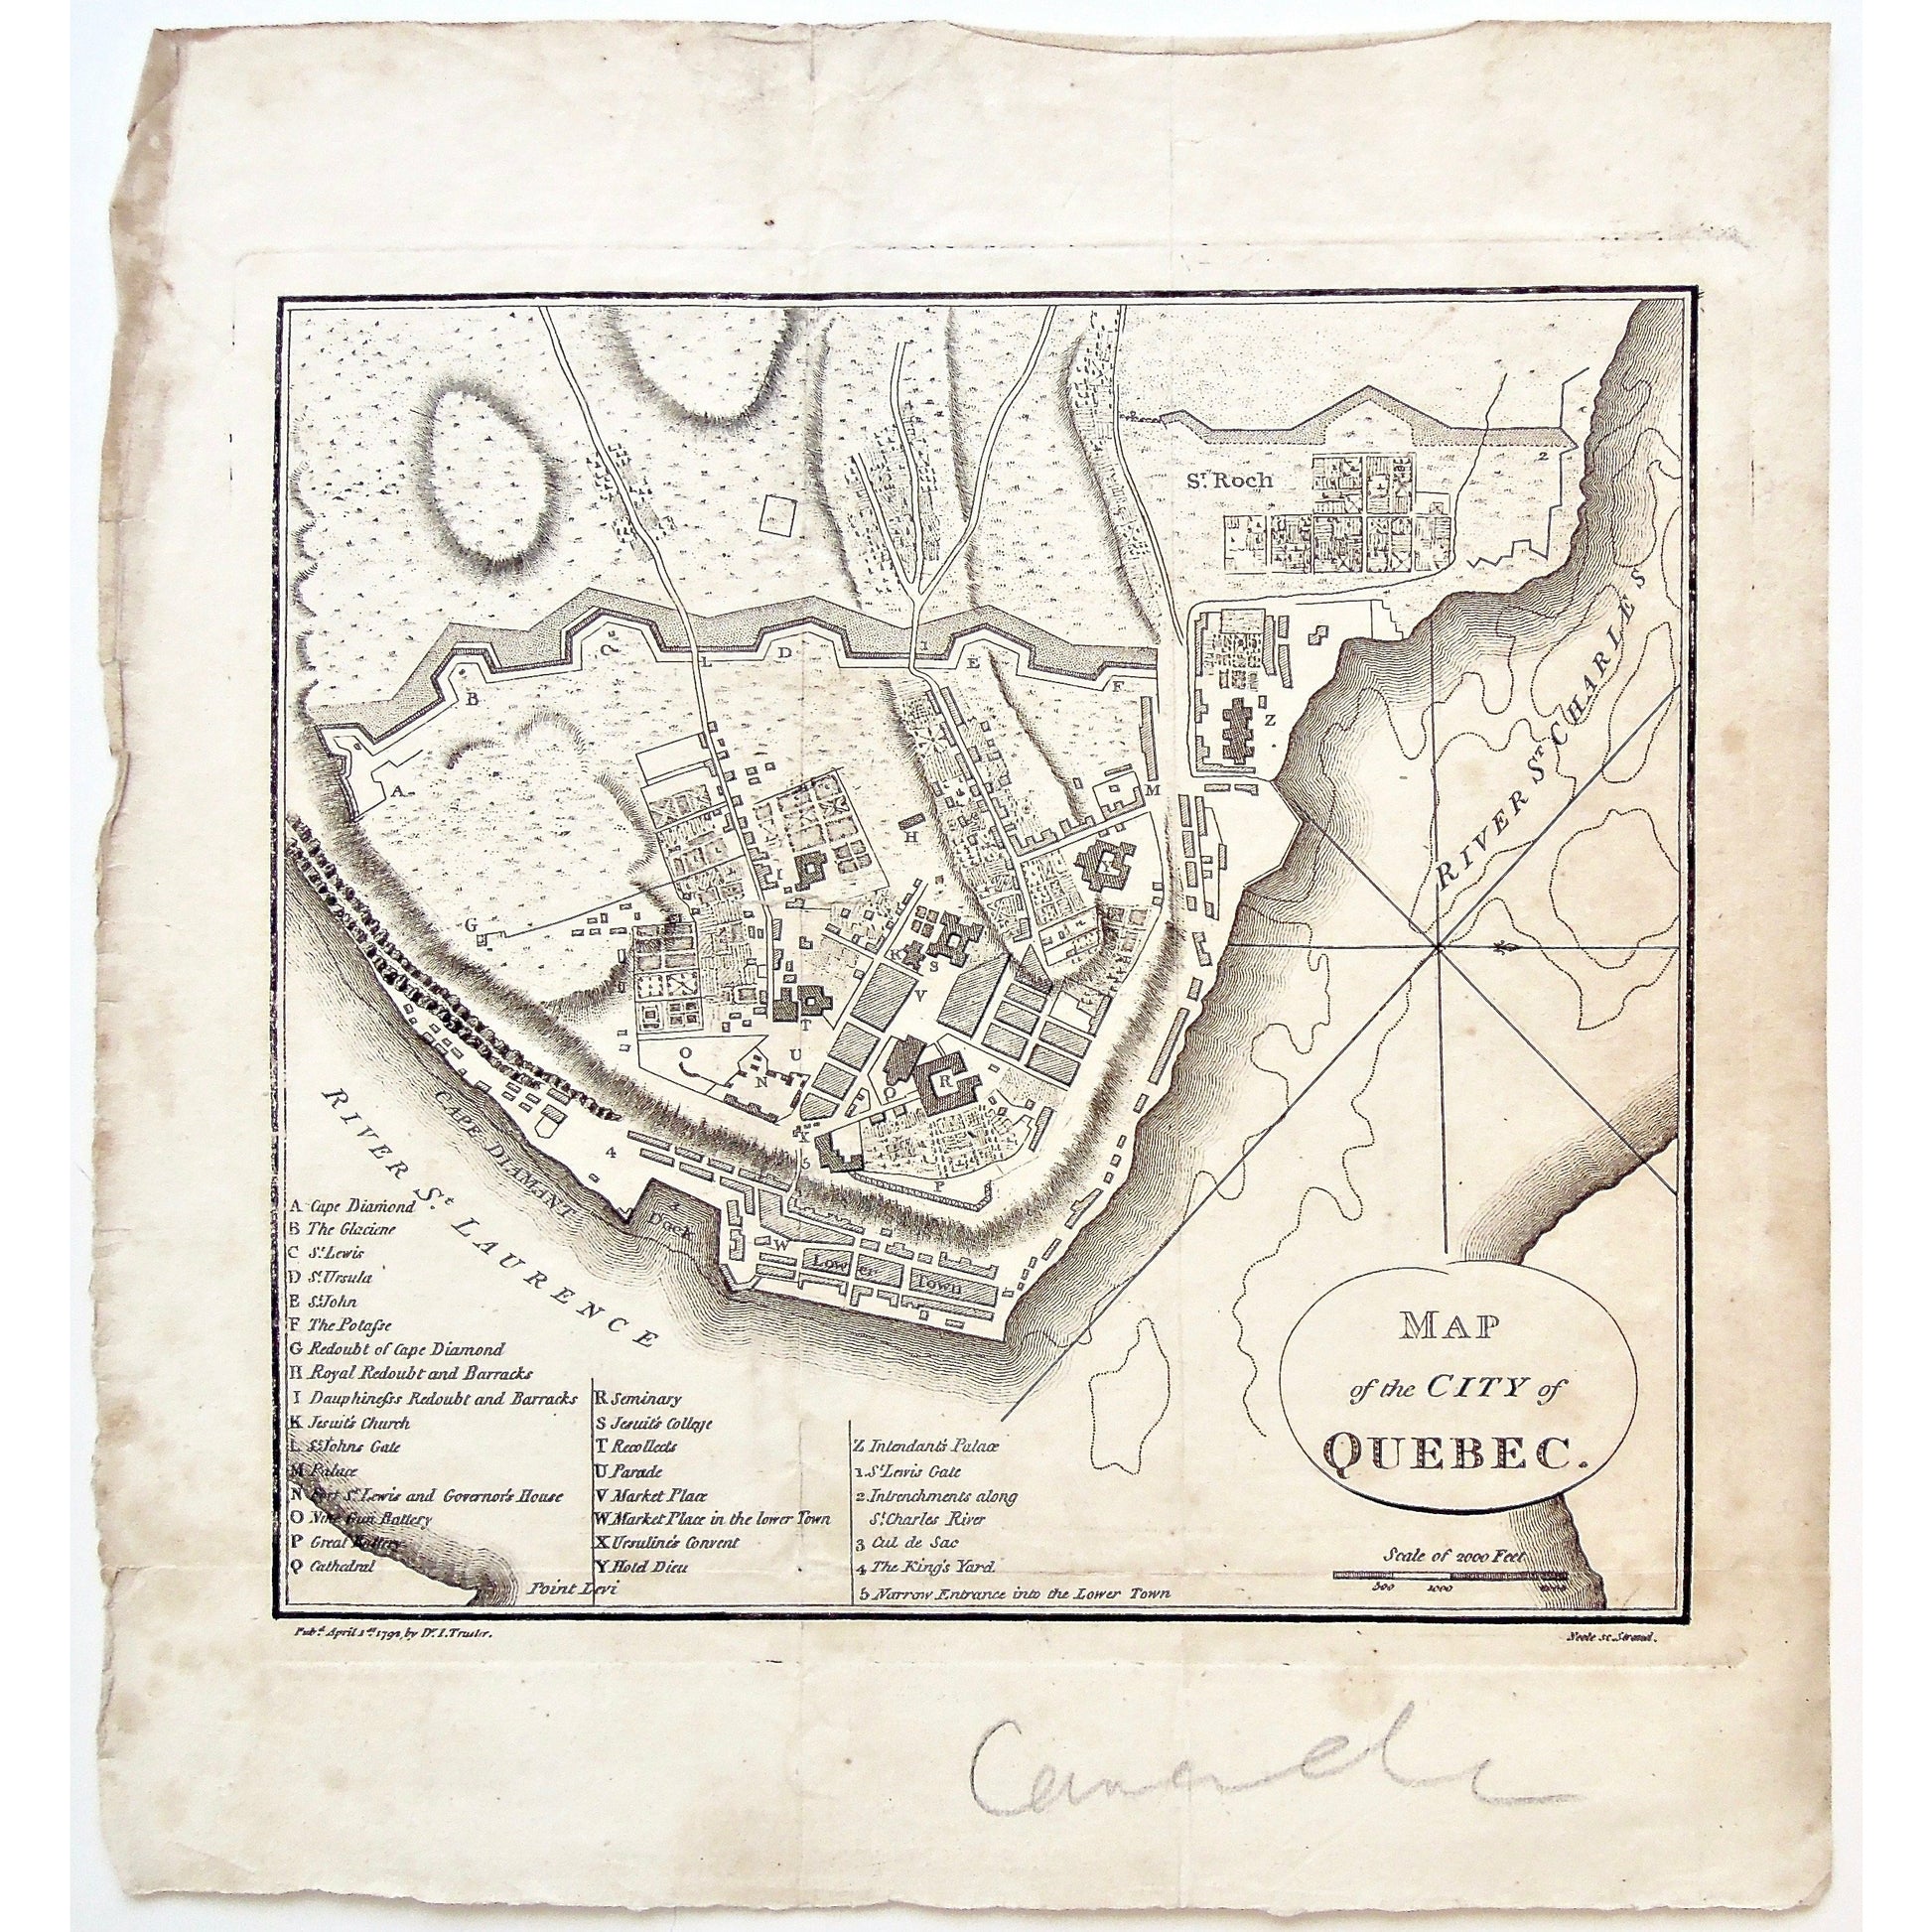 Map, Map of the City of Quebec, Map of Quebec City, Quebec City, St. Charles River, St. Roch, Lower town, Cape Diamant, Cape Diamond, Glaciene, St. Lewis, St. Ursula, St. John Potasse, Redoubt of Cape Diamond, Royal Redoubt, Royal Barracks, Barracks, Dauphiness' Redoubt, Dauphiness, Jesuits Church, Palace, St. John's Gate, Governor's House, Fort St. Lewis, Nine Gun battery, Great Battery,  Intendant's Palace, St. Lewis Gate, King's Yard, Maps, Mapping, Chart, Charts, Charting, Hotel Dieu, Ursuline Convent, 